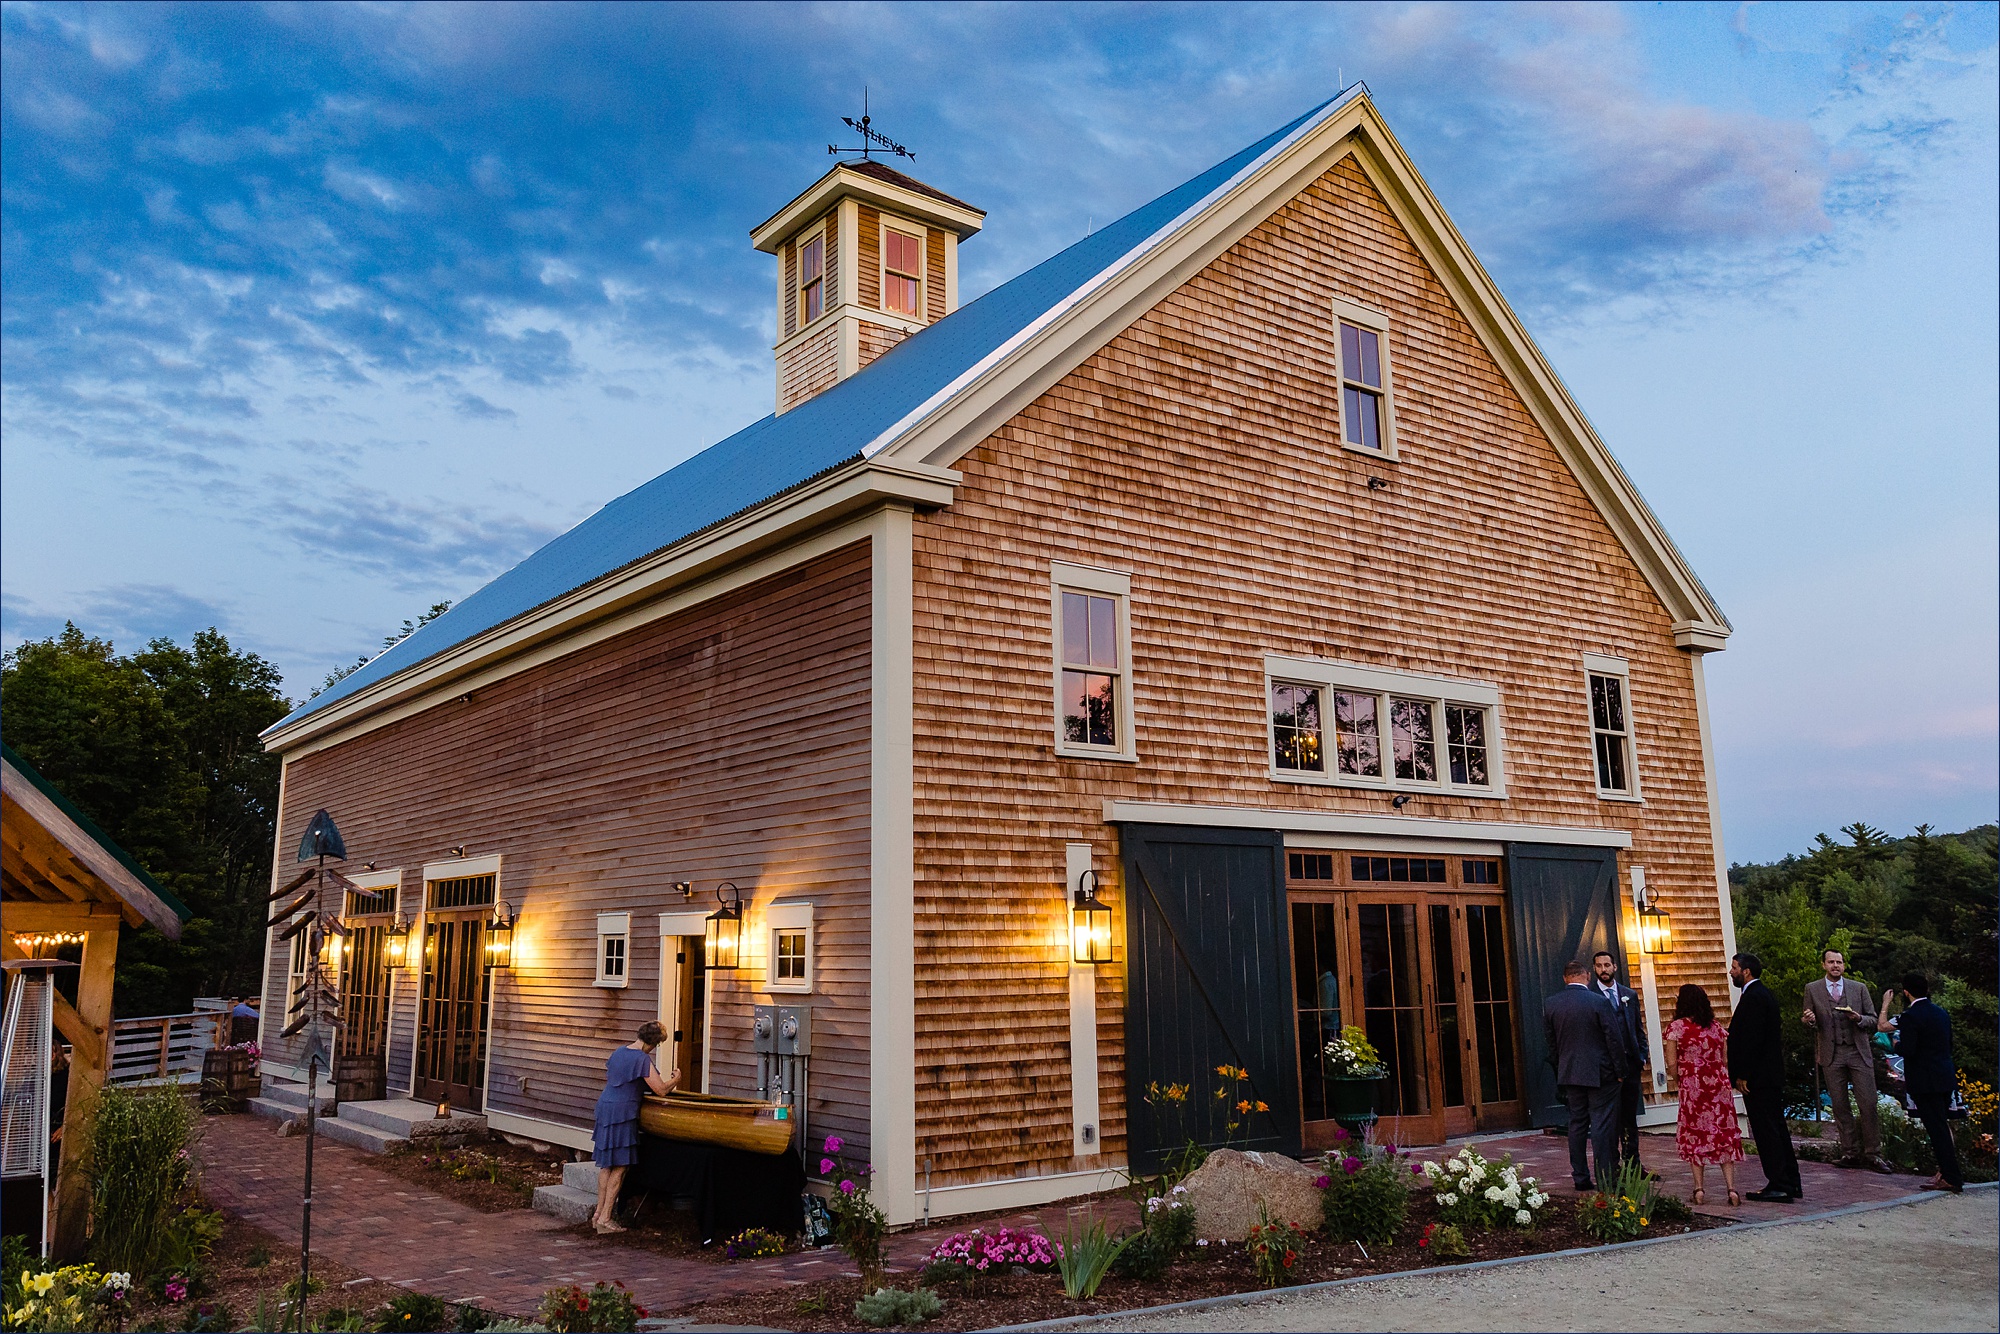 The barn at the Preserve at Chocorua NH stands tall in the sunset light at the end of a wedding day